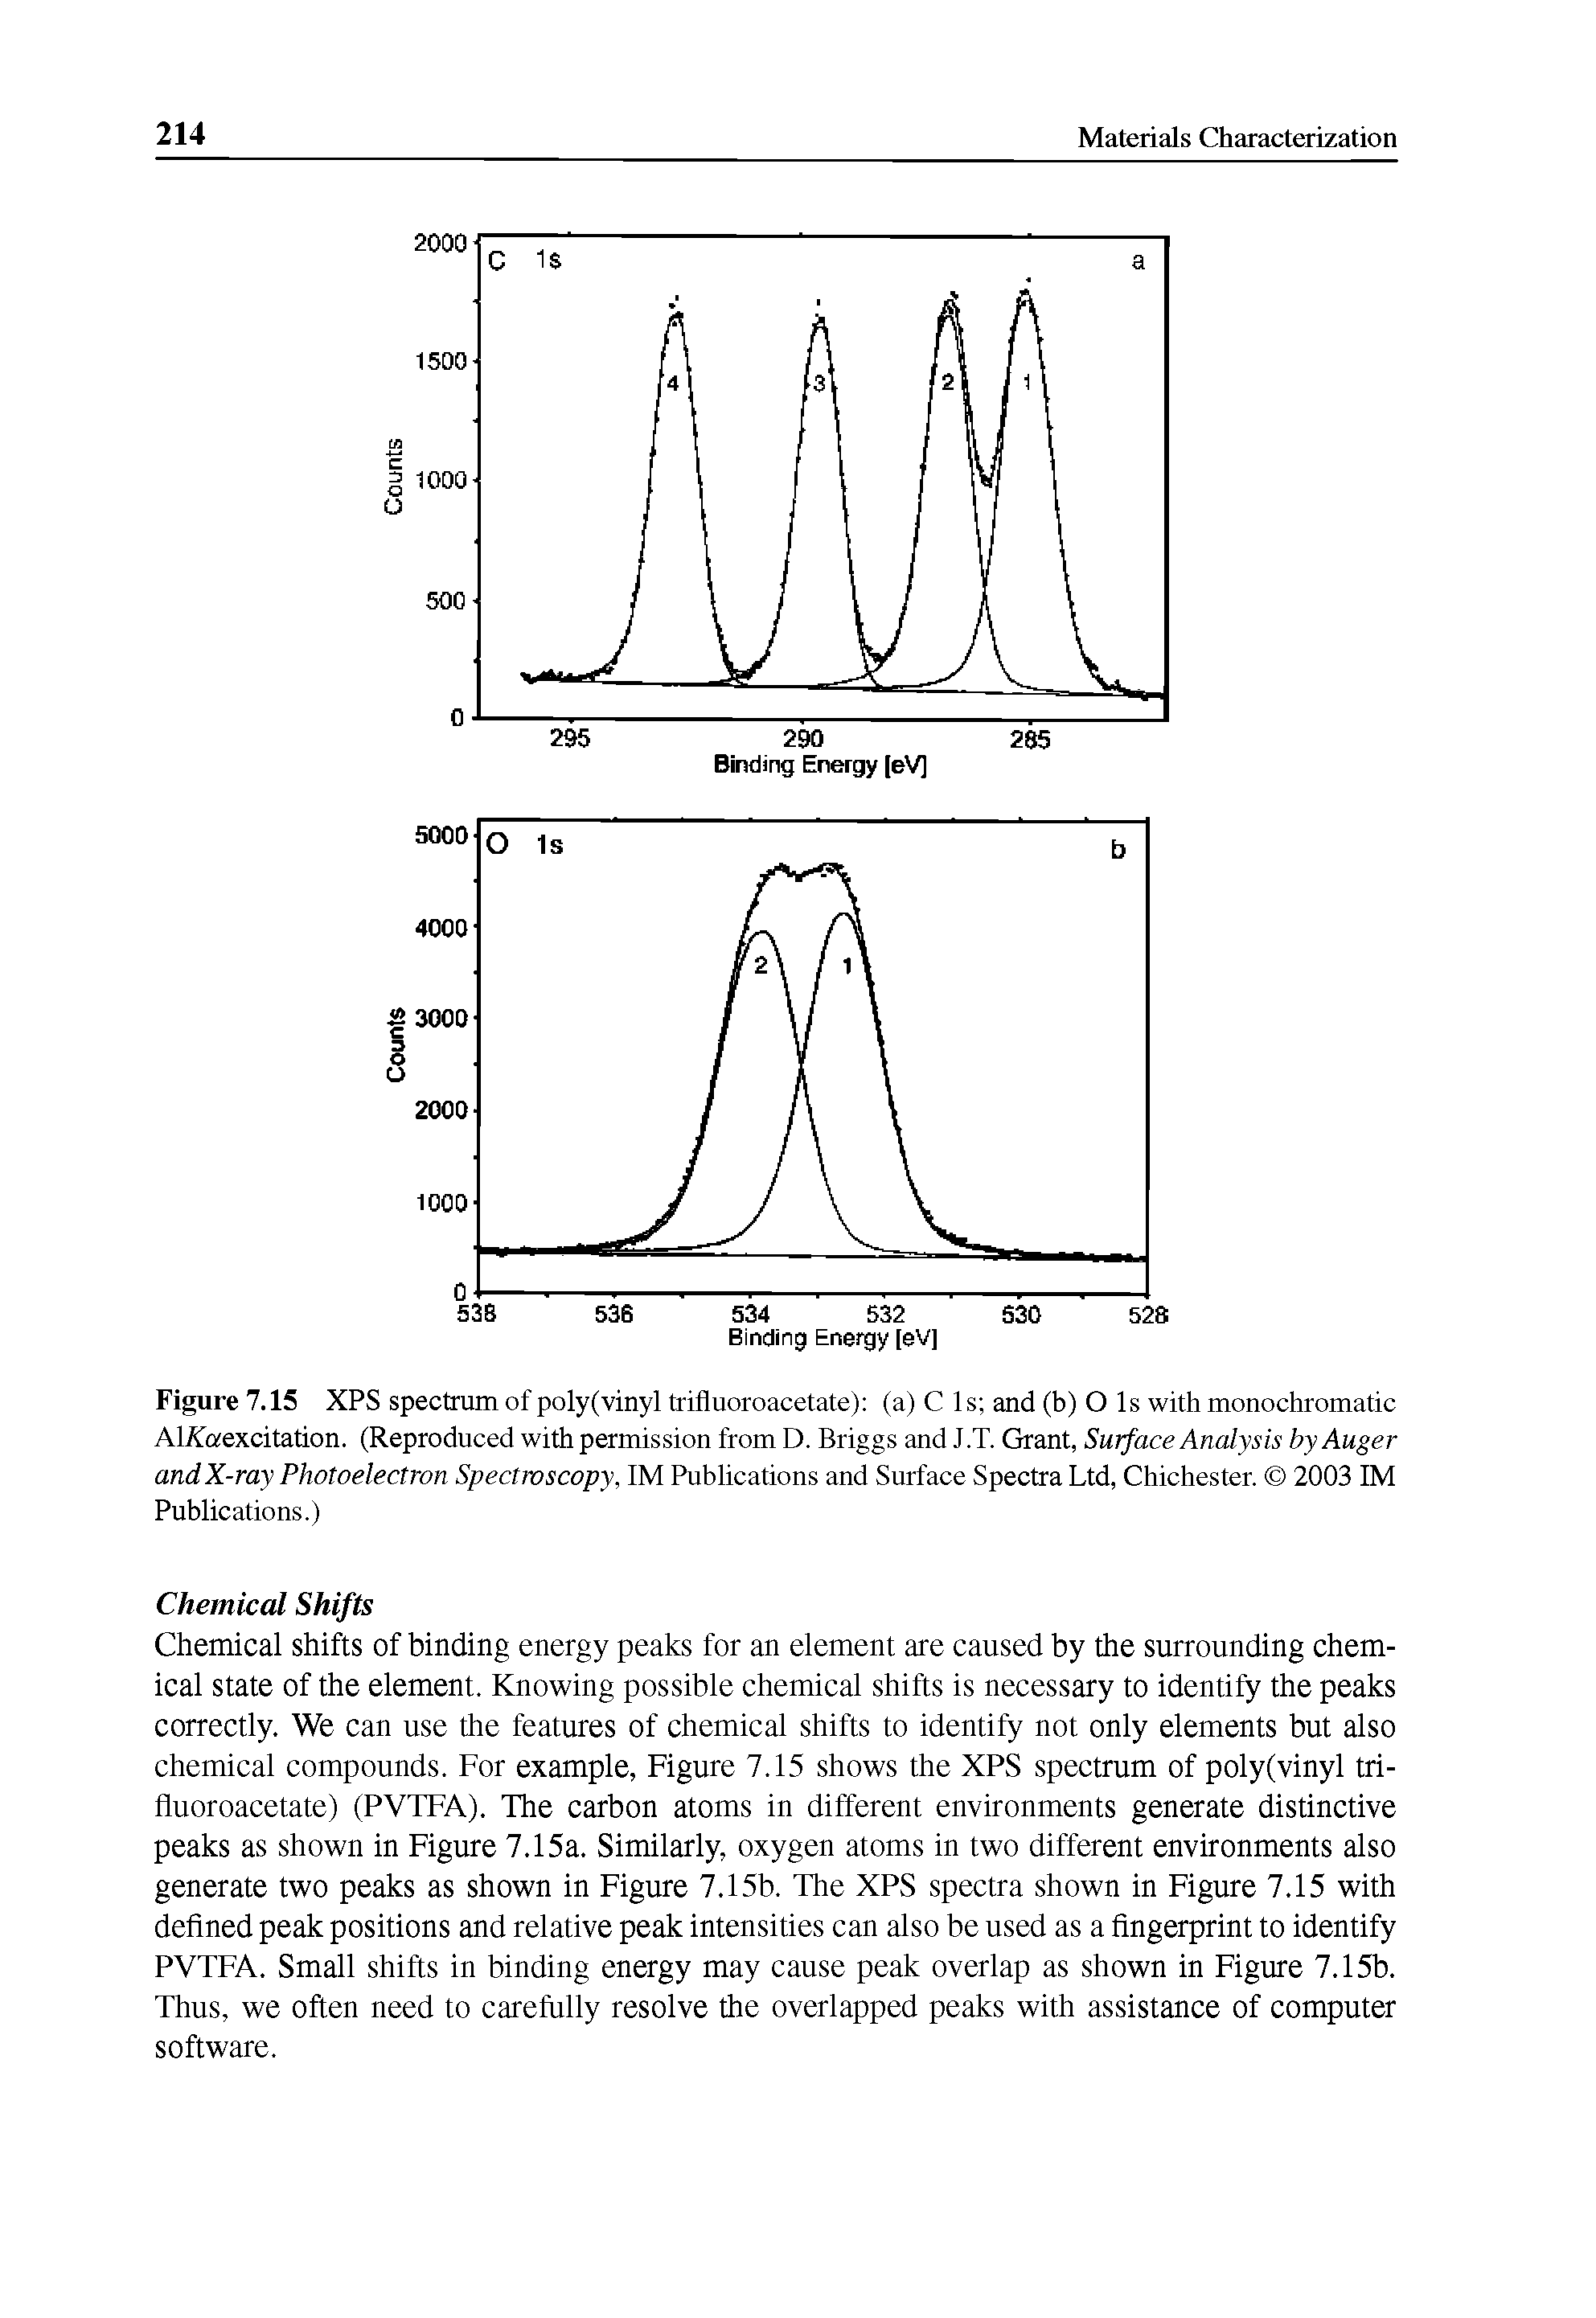 Figure 7.15 XPS spectrum of poly(vinyl trifluoroacetate) (a) C Is and (b) O Is with monochromatic AlKaexcitation. (Reproduced with permission from D. Briggs and J.T. Grant, Surface Analysis by Auger and X-ray Photoelectron Spectroscopy, IM Publications and Surface Spectra Ltd, Chichester. 2003 IM Publications.)...